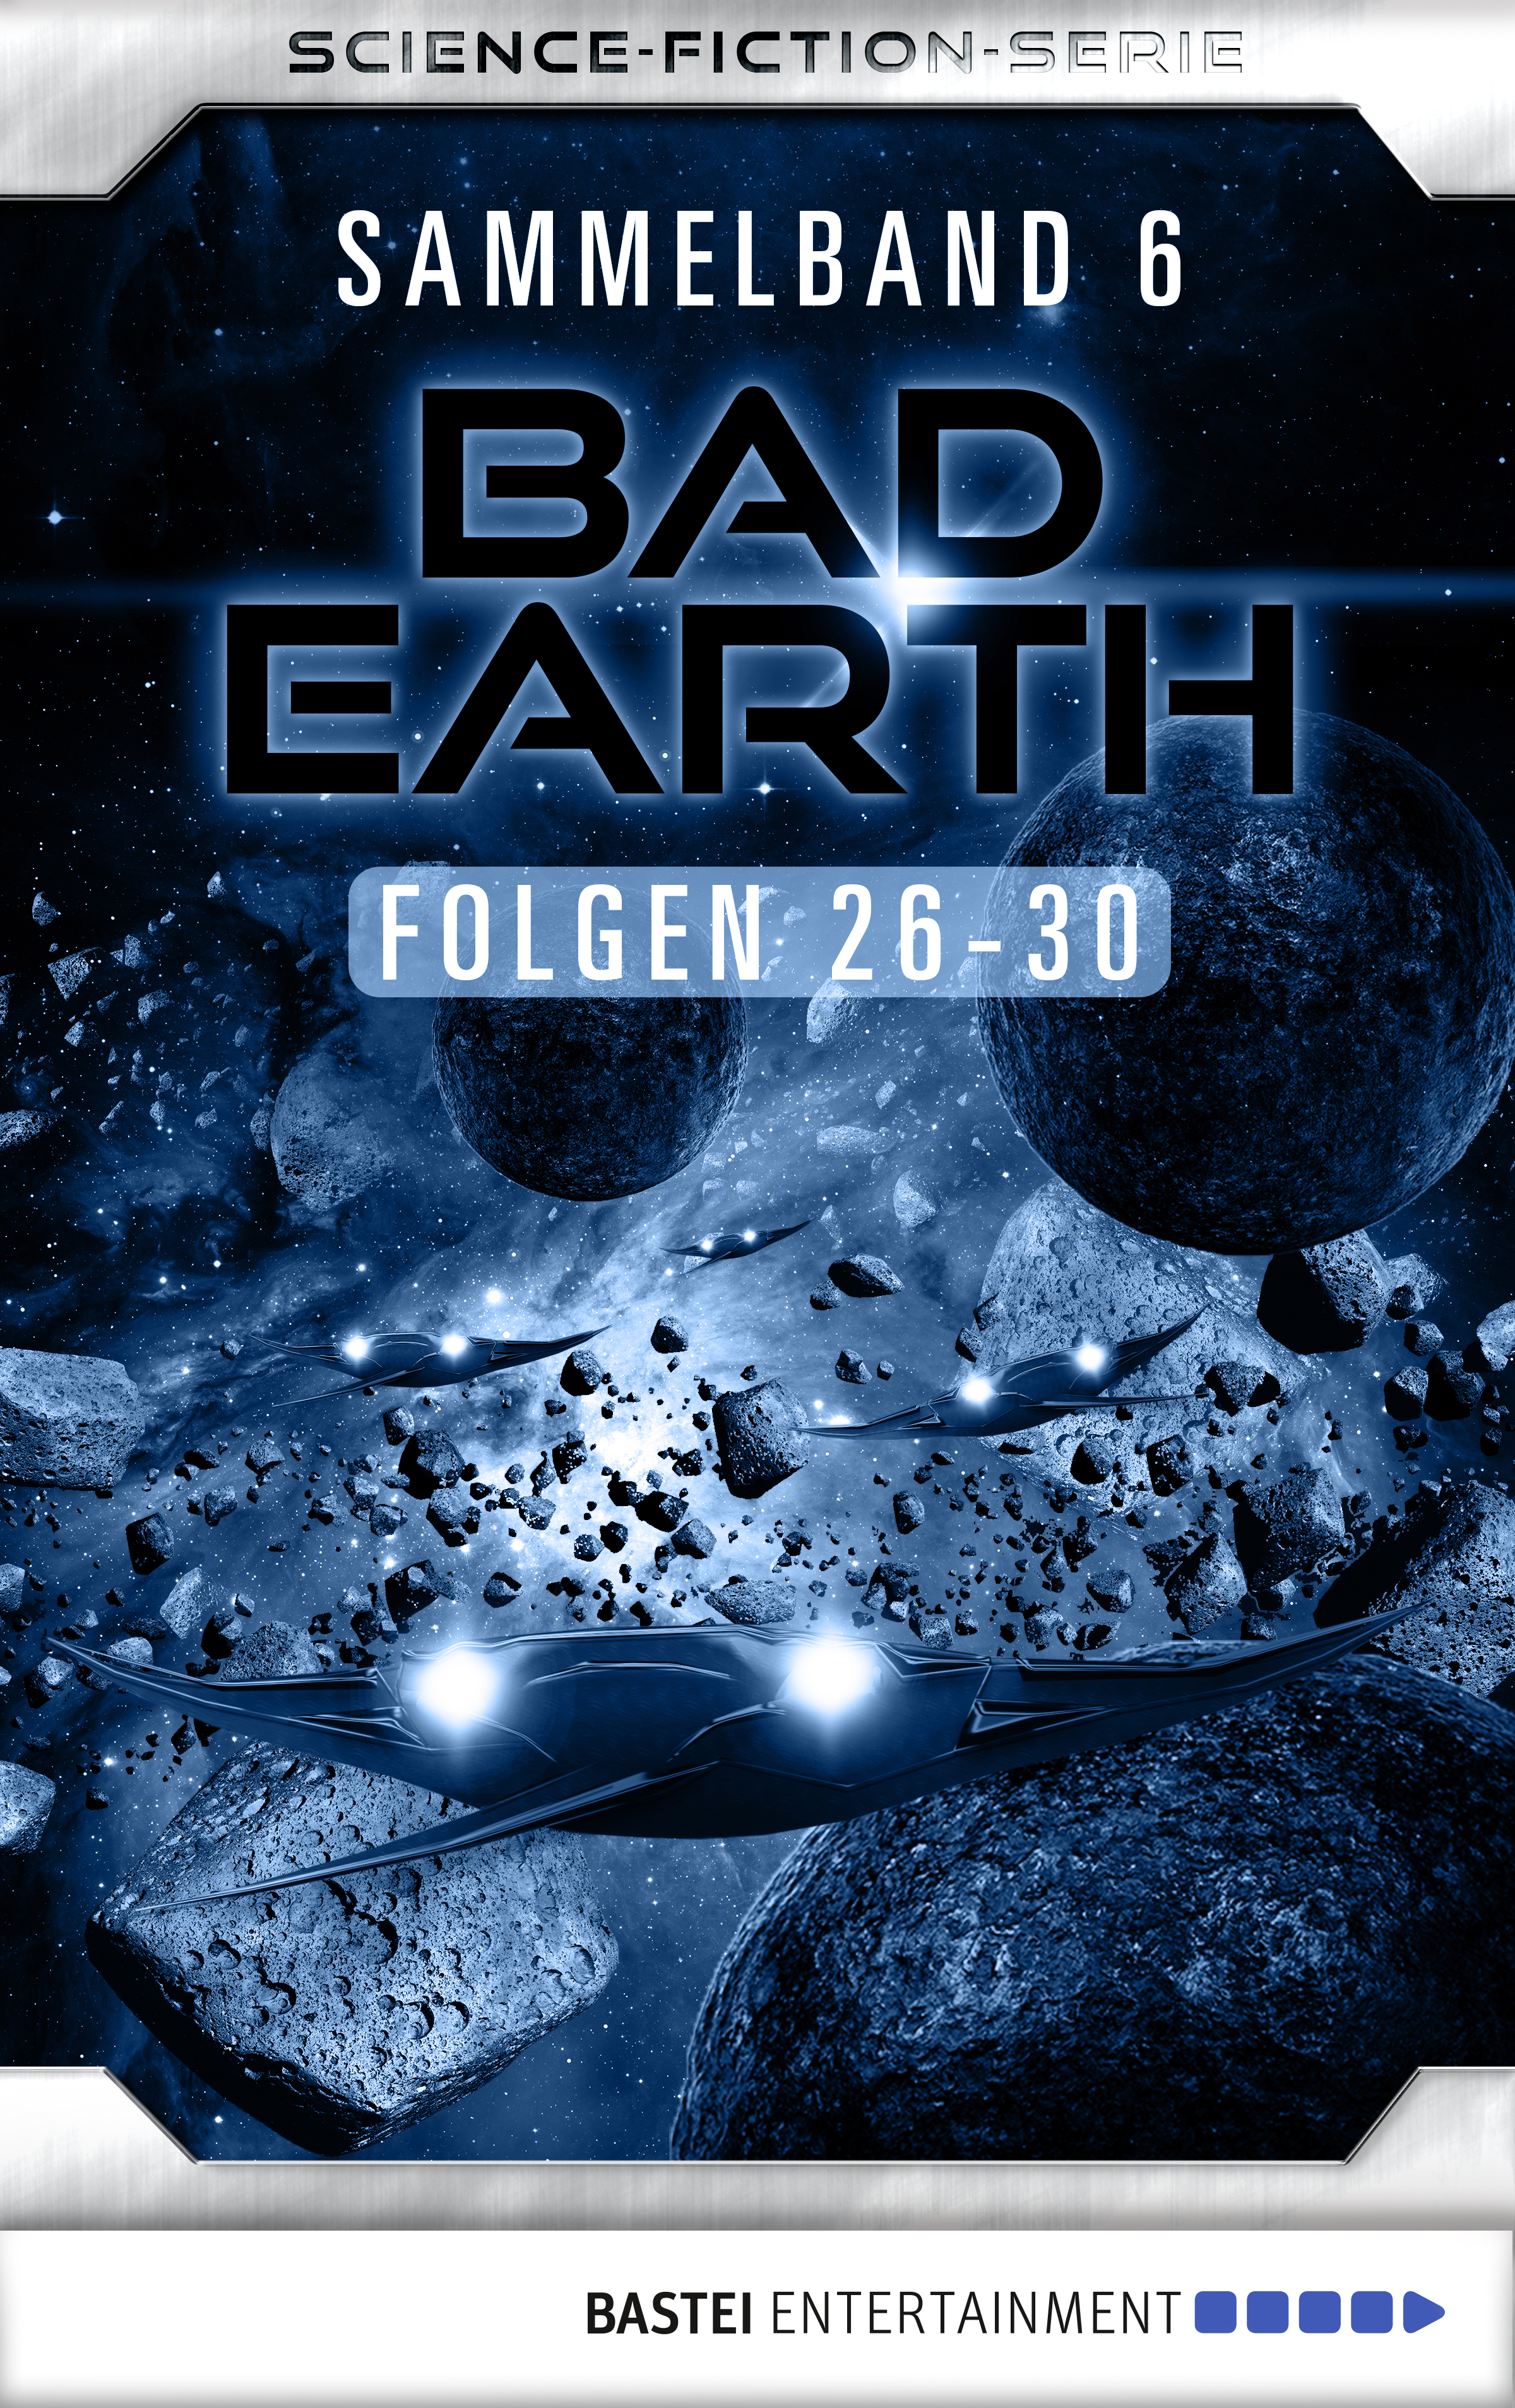 Bad Earth Sammelband 6 - Science-Fiction-Serie